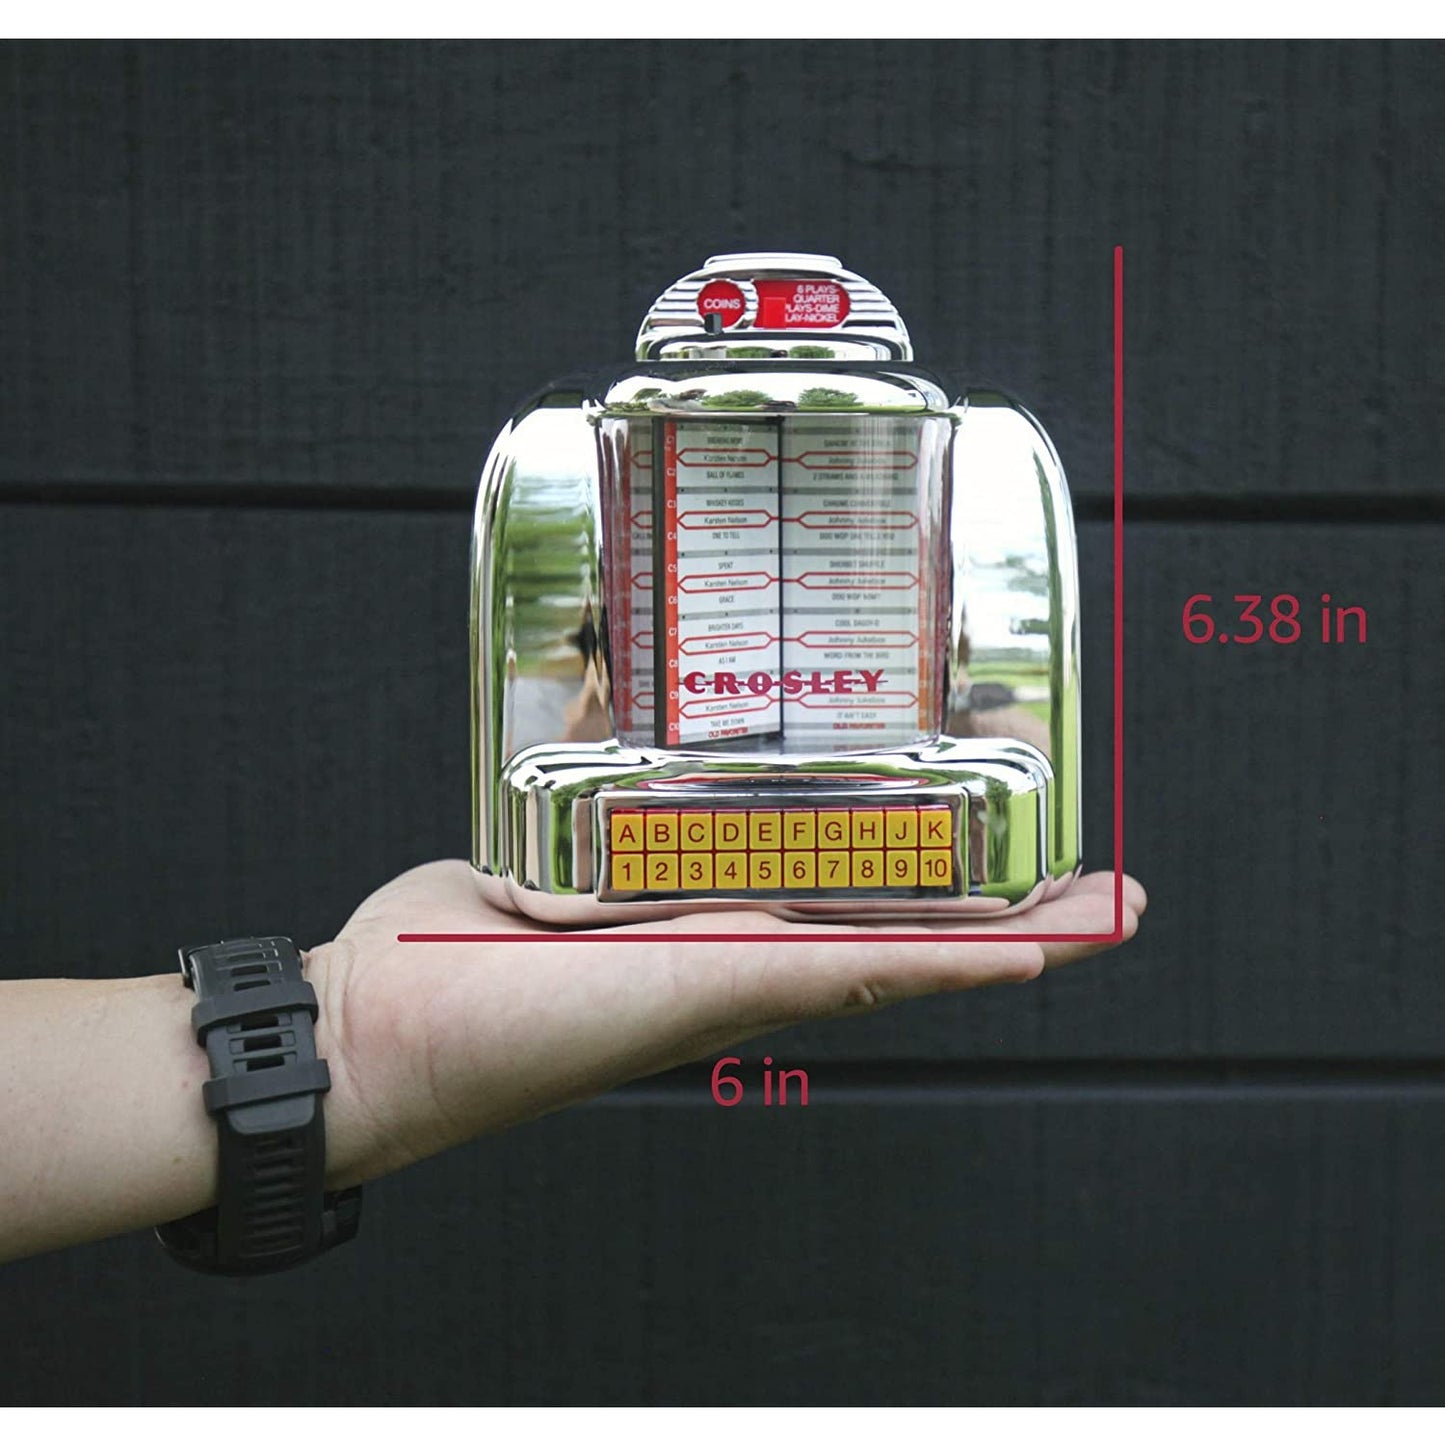 Size measurements for a retro jukebox radio. It measures, 6.38 inches in height by 6 inches wide.